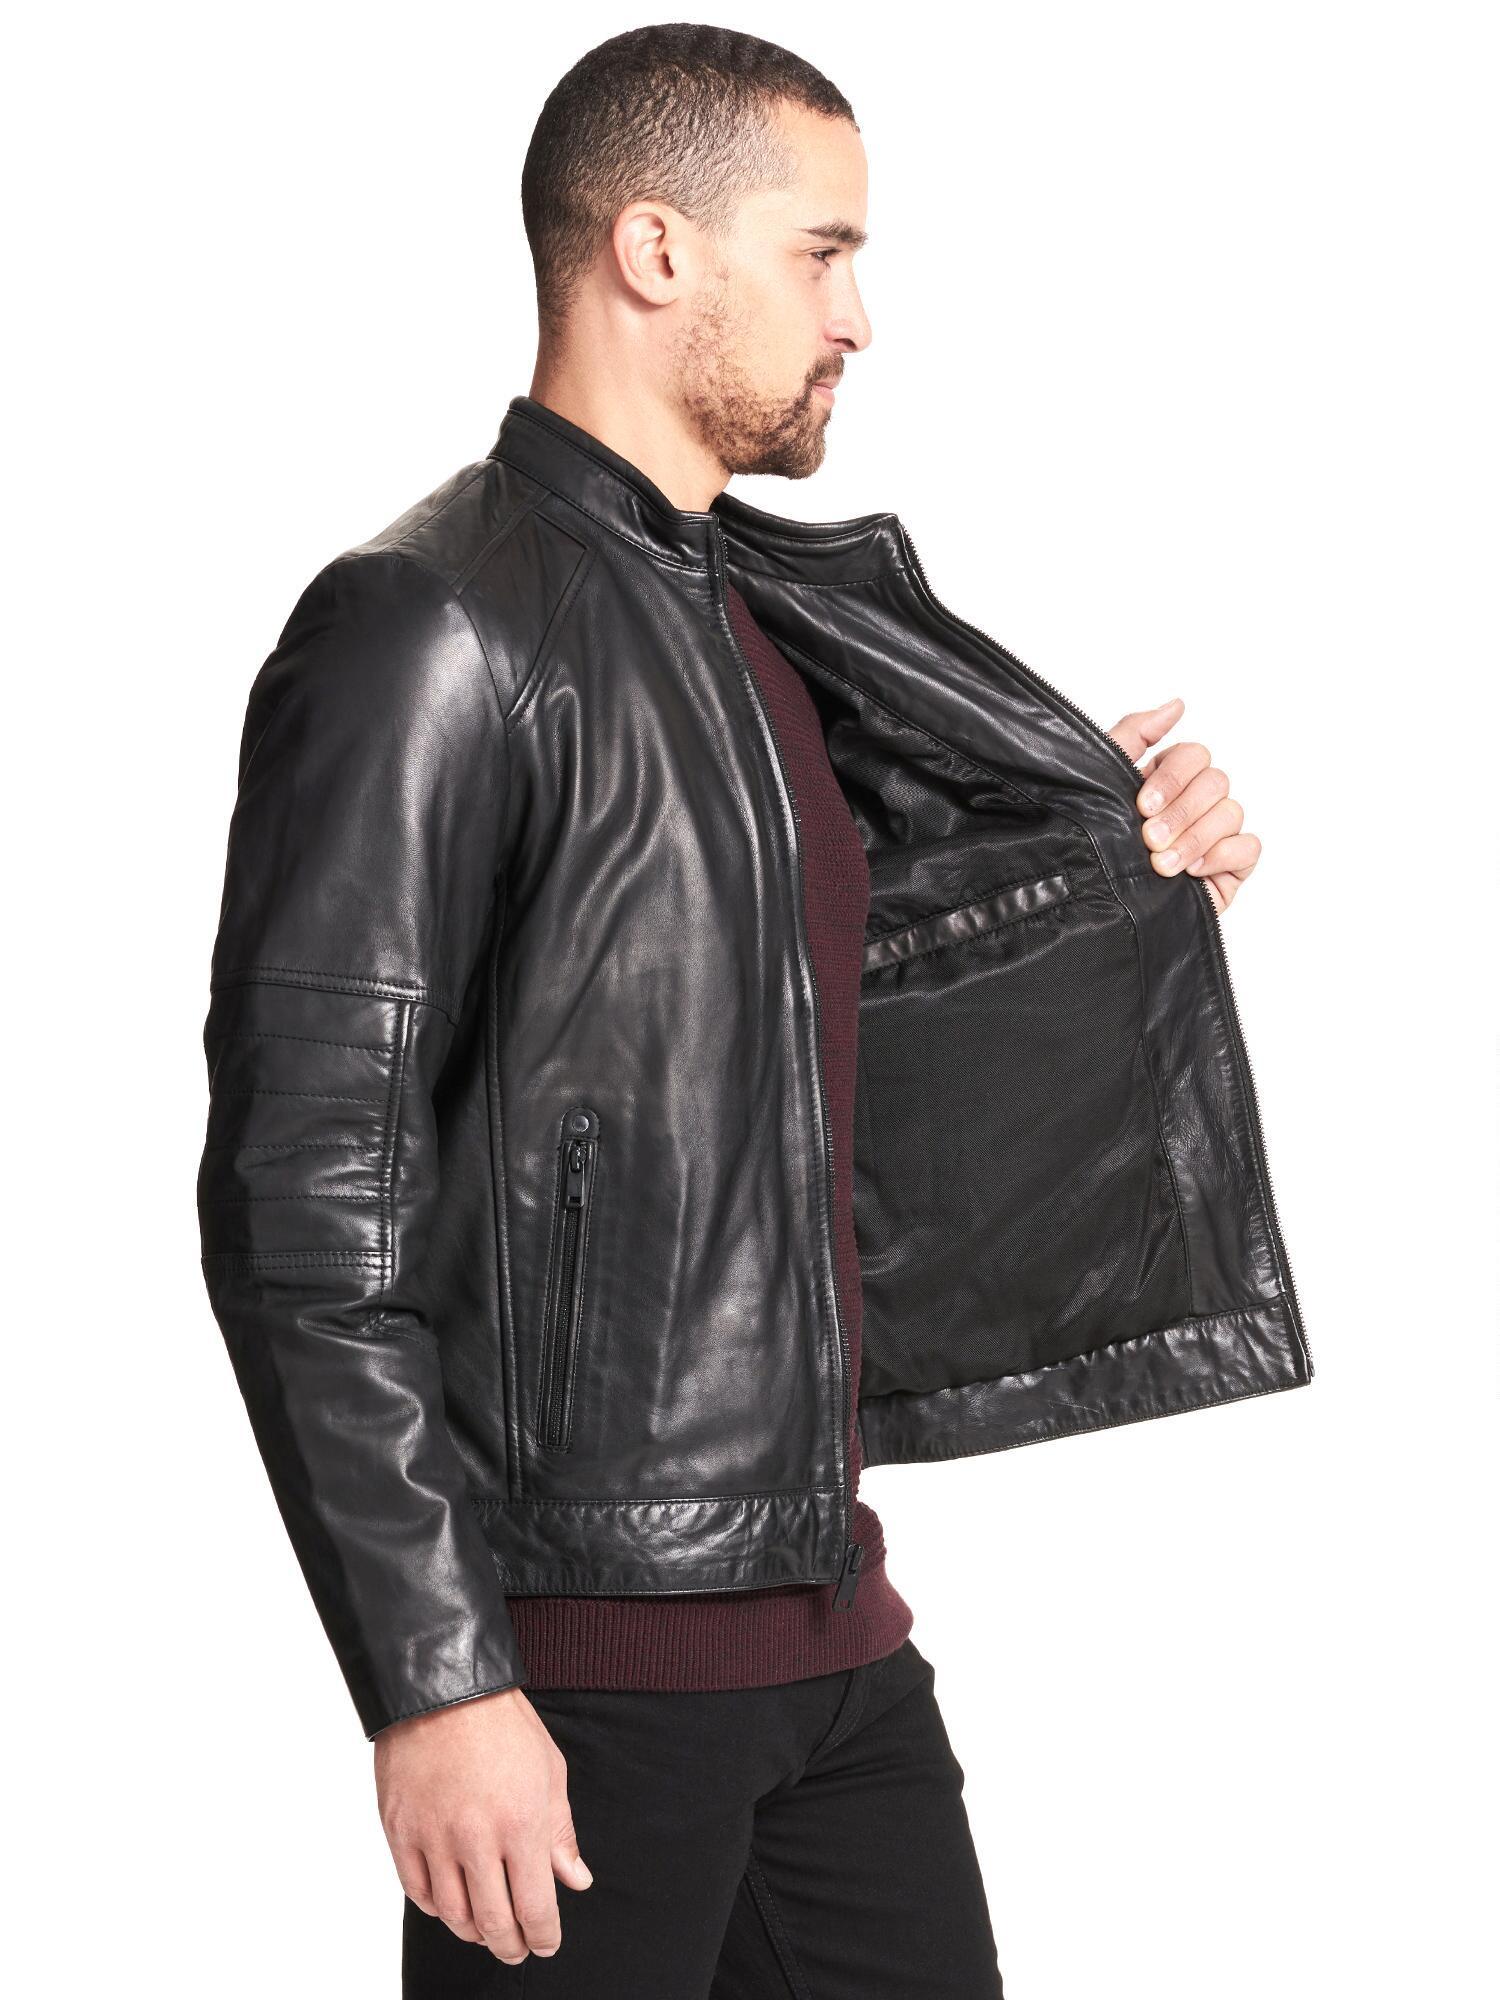 Wilsons Leather Toby Leather Jacket in Black for Men - Lyst